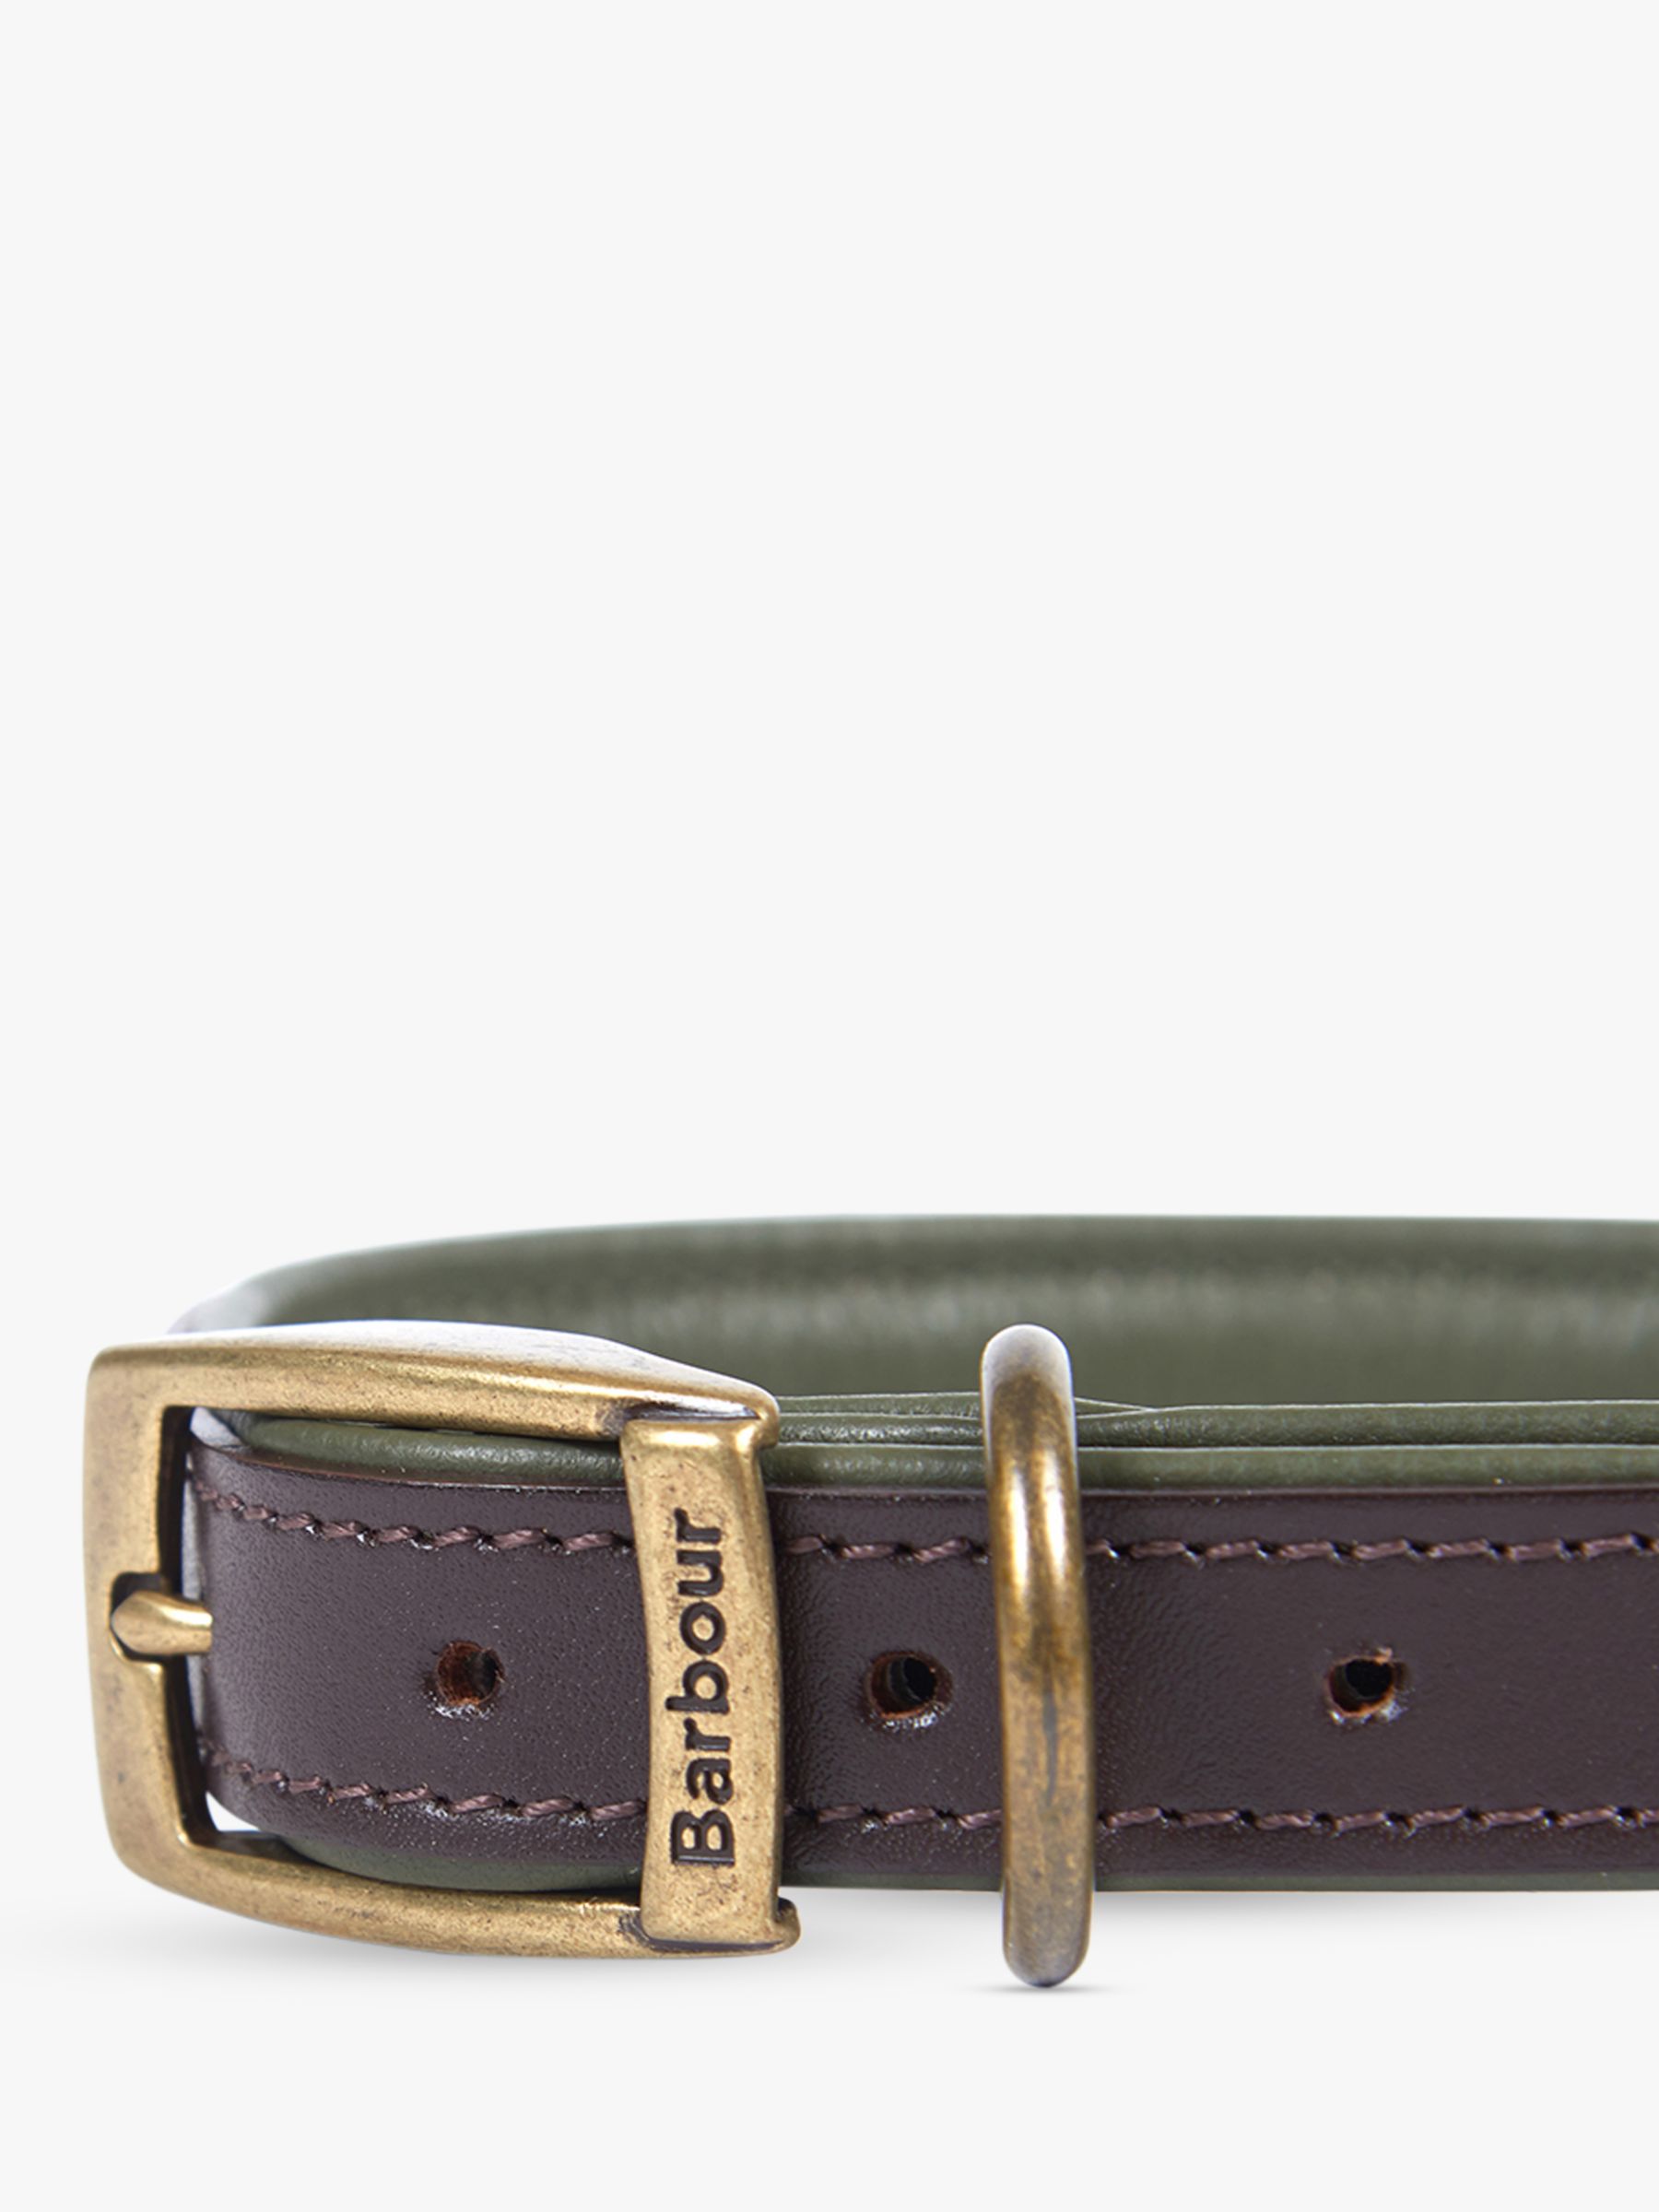 barbour leather dog collar